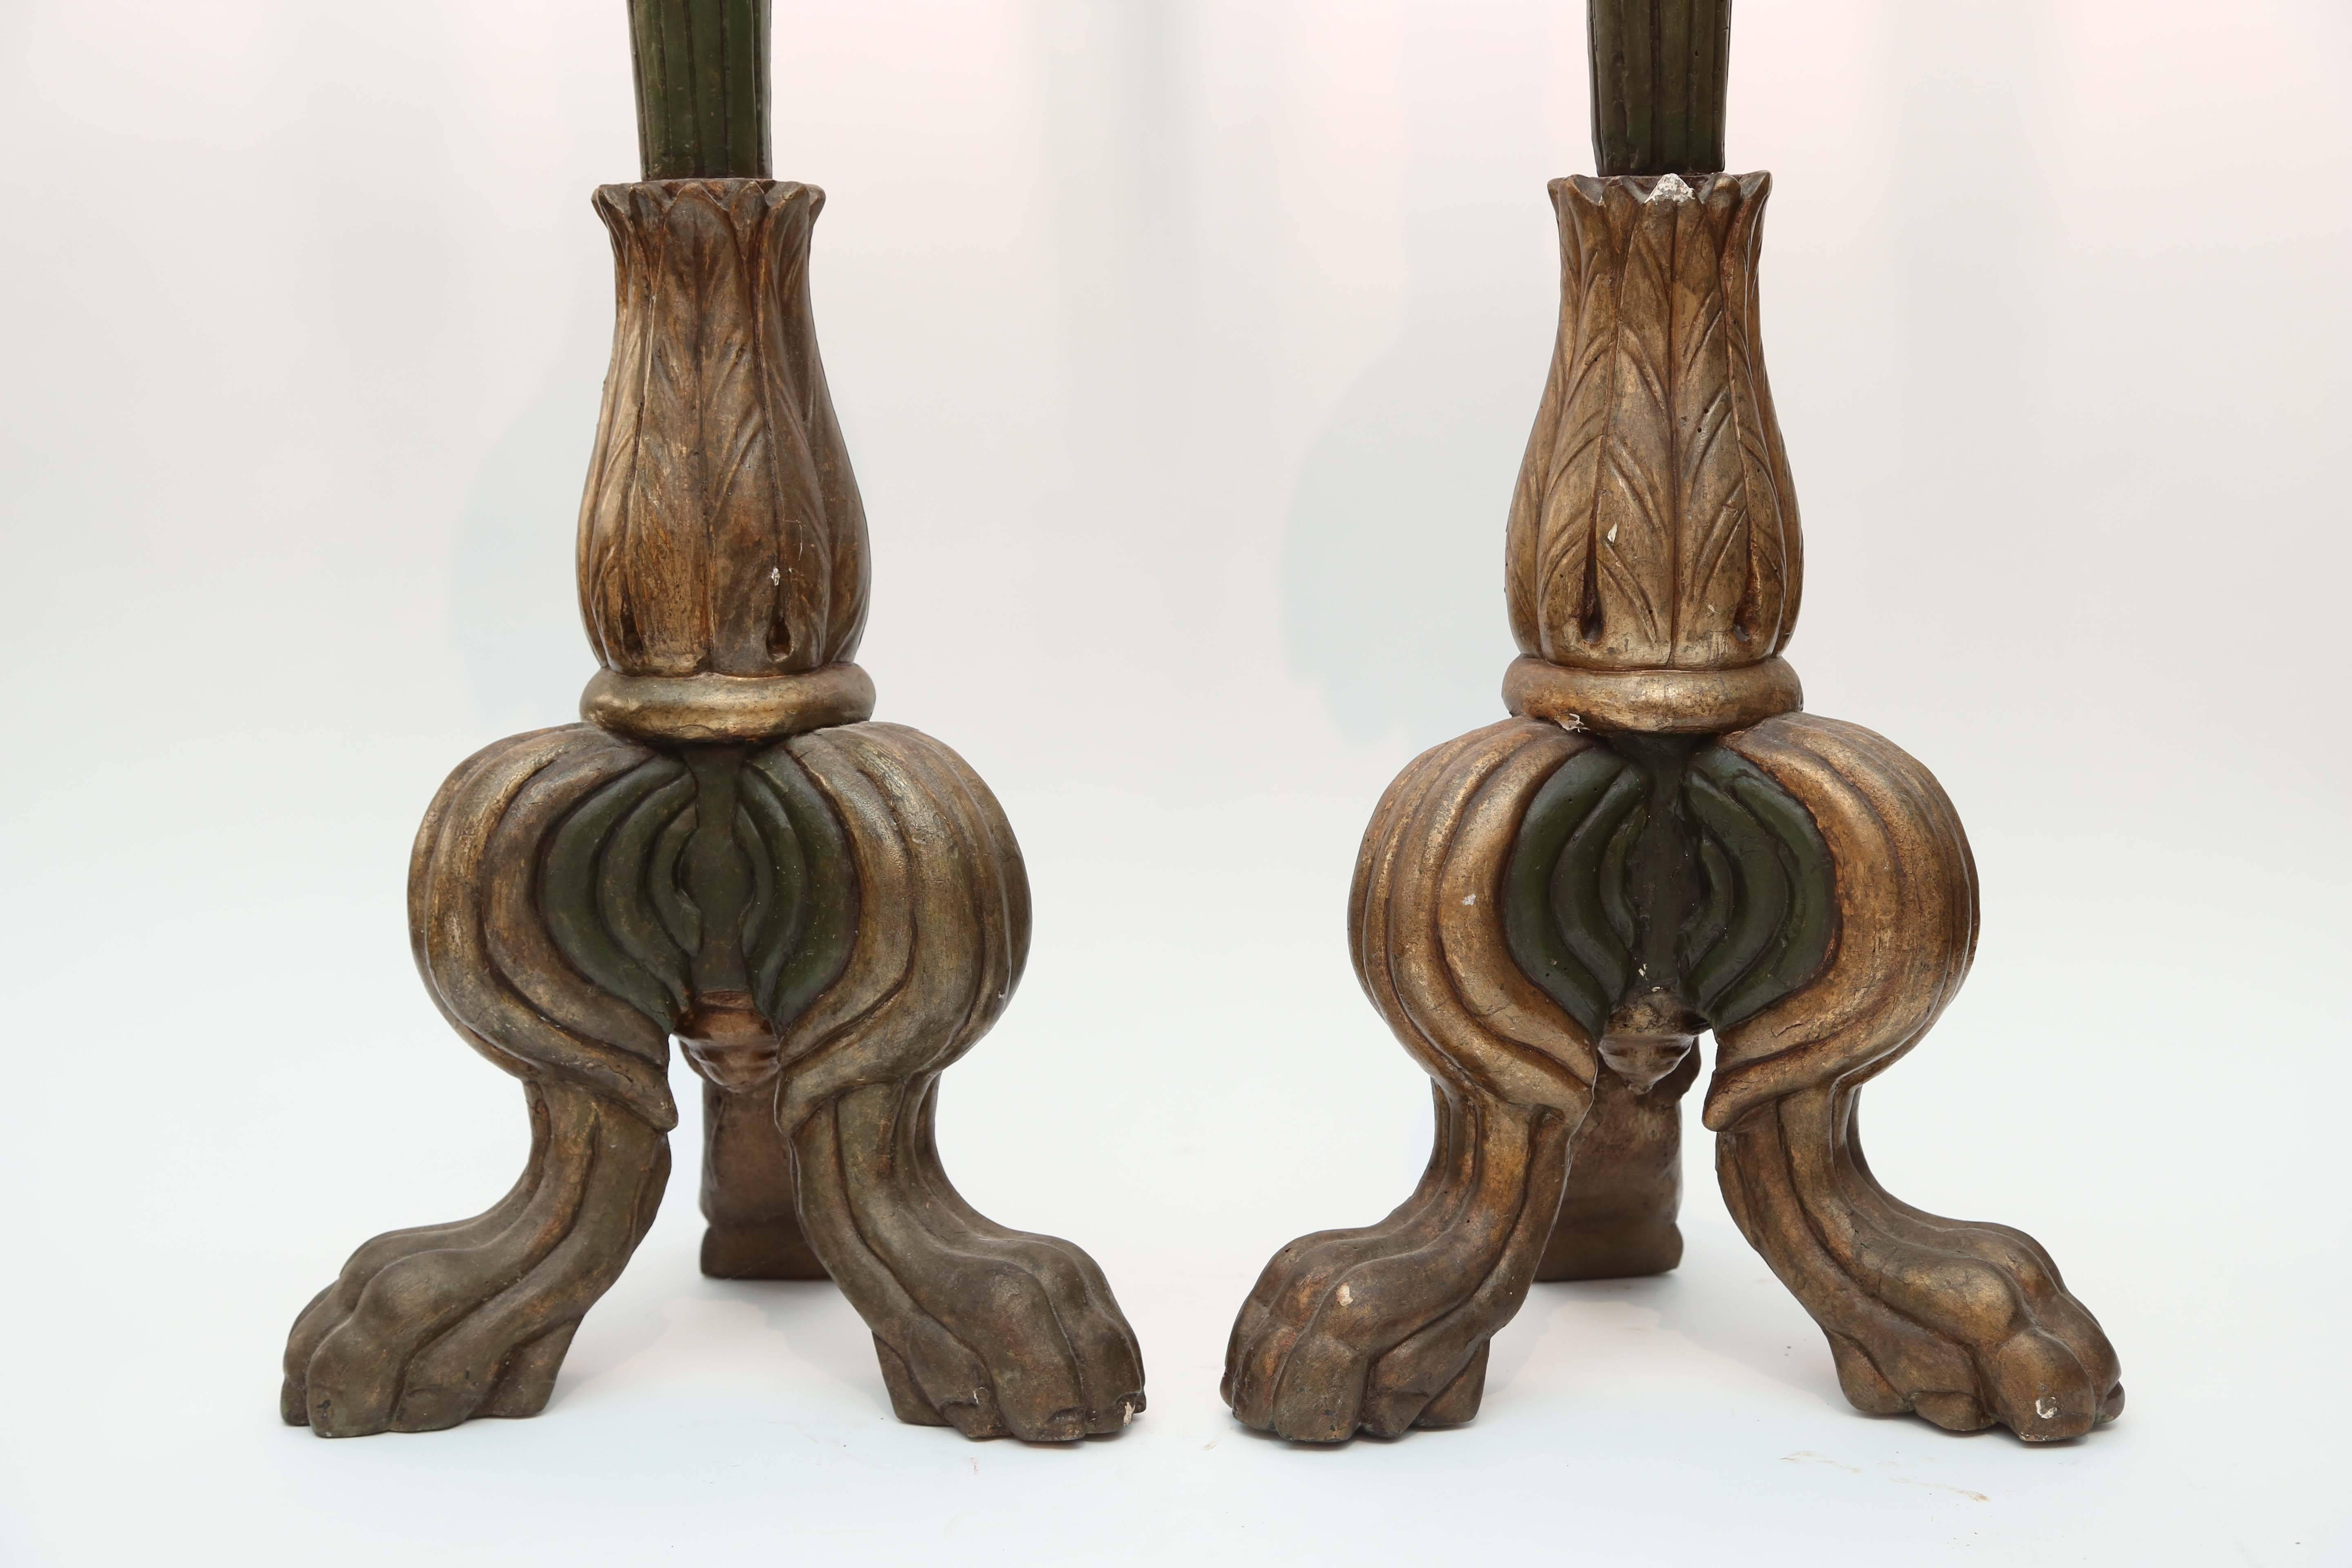 Pair of 19th century Italian candle stands. Elegant style and proportions with "paw" feet and crisp carving.